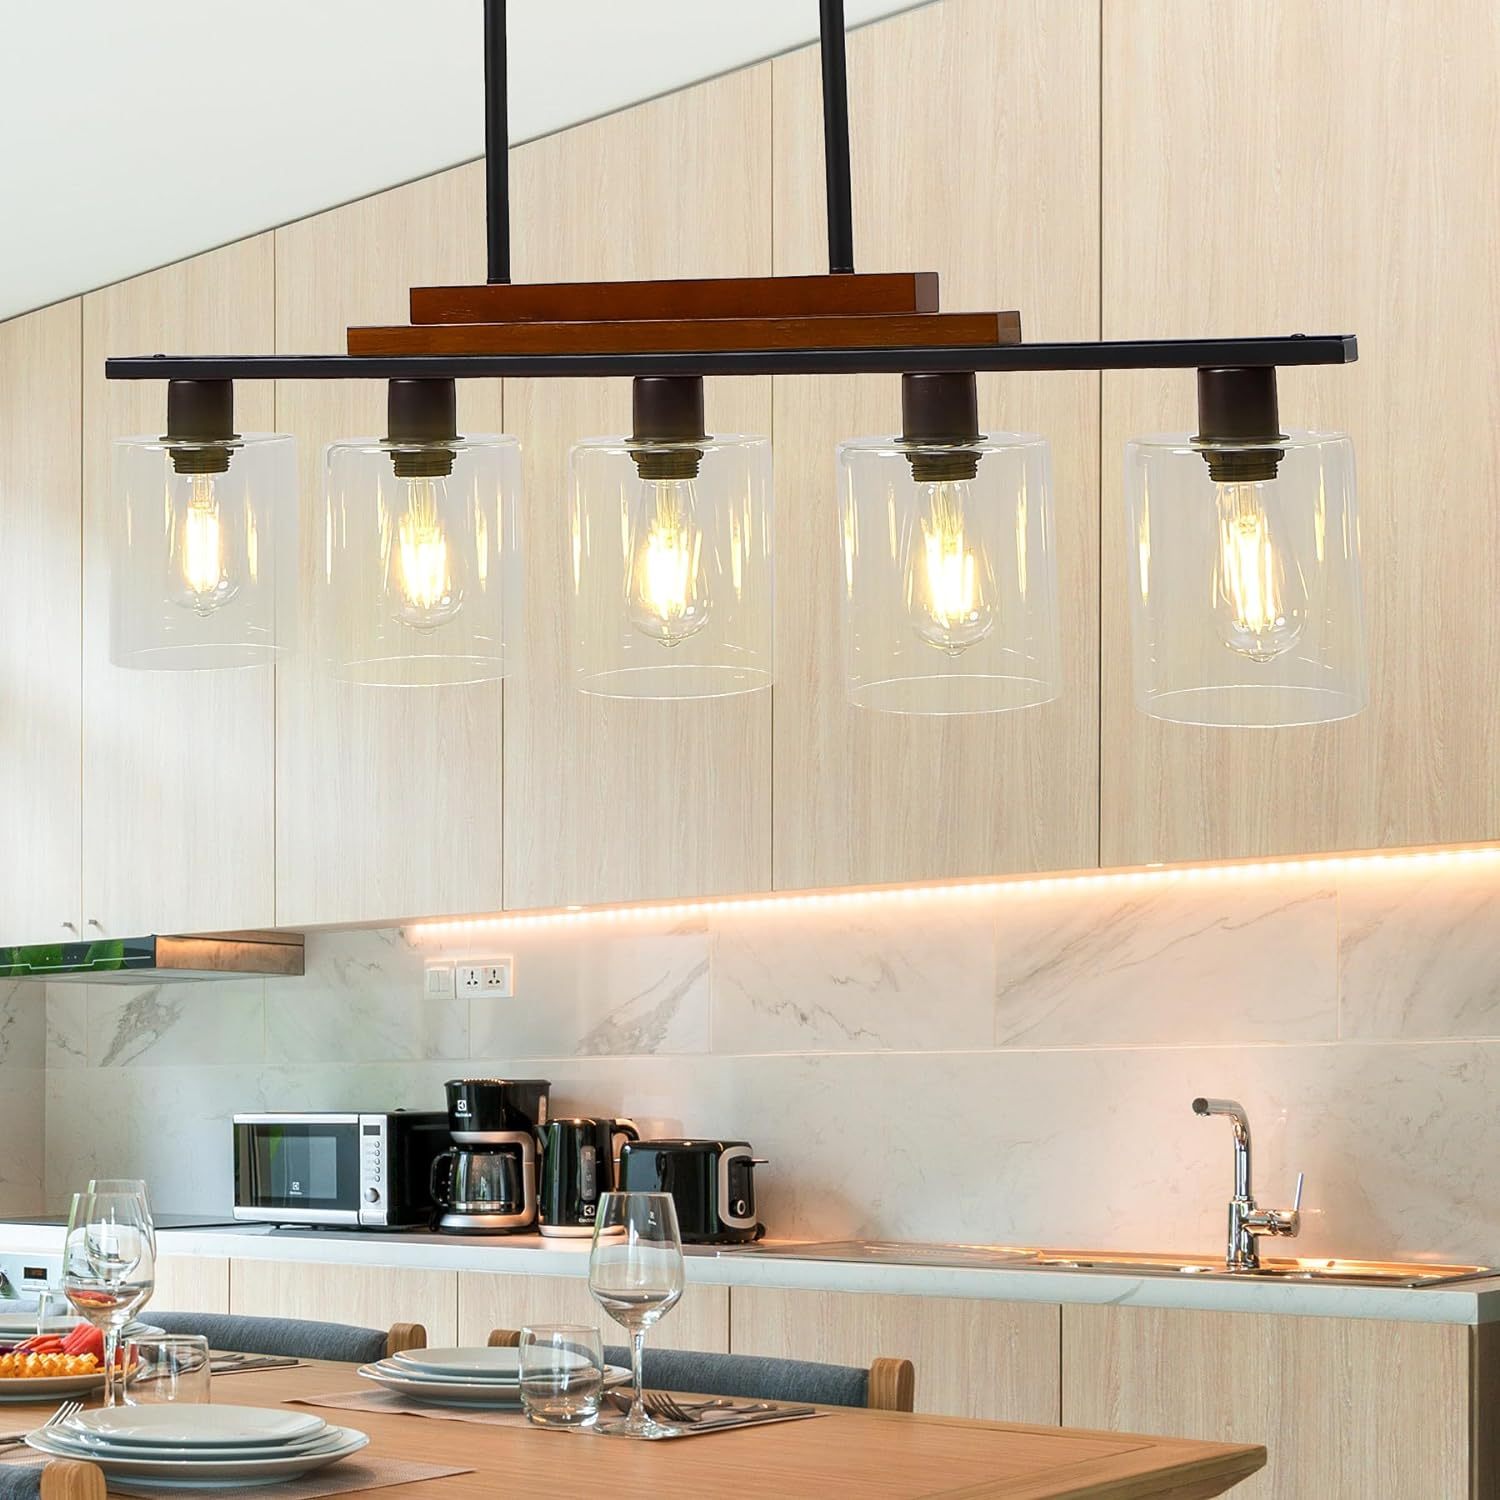 

Kitchen Island Lighting, 5 Lights Dining Room Light Fixture Farmhouse Chandeliers For Dining Room With Clear Glass Shade Rustic Wood Adjustable Rods Pendant Light Fixtures